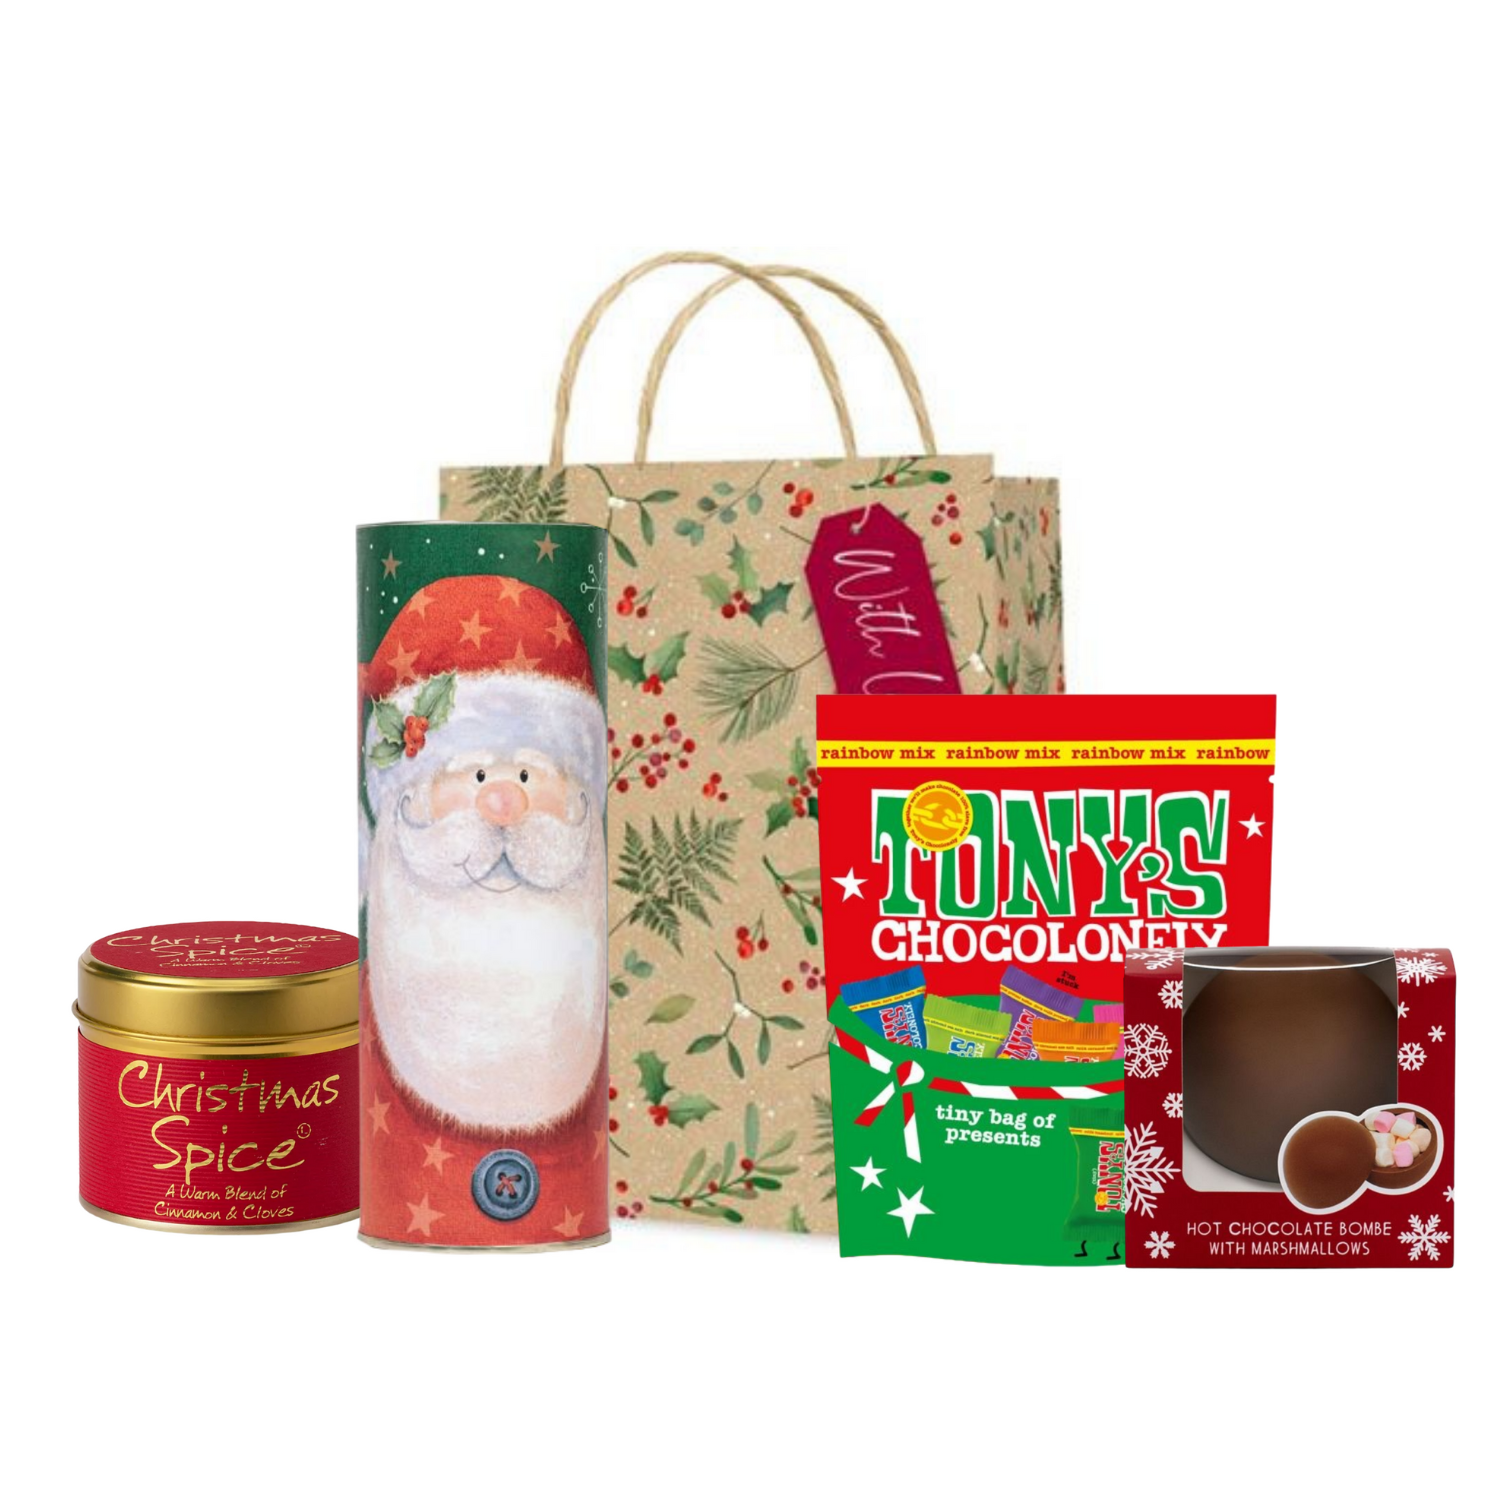 Christmas gifts Christmas corporate gifts Employee gifts